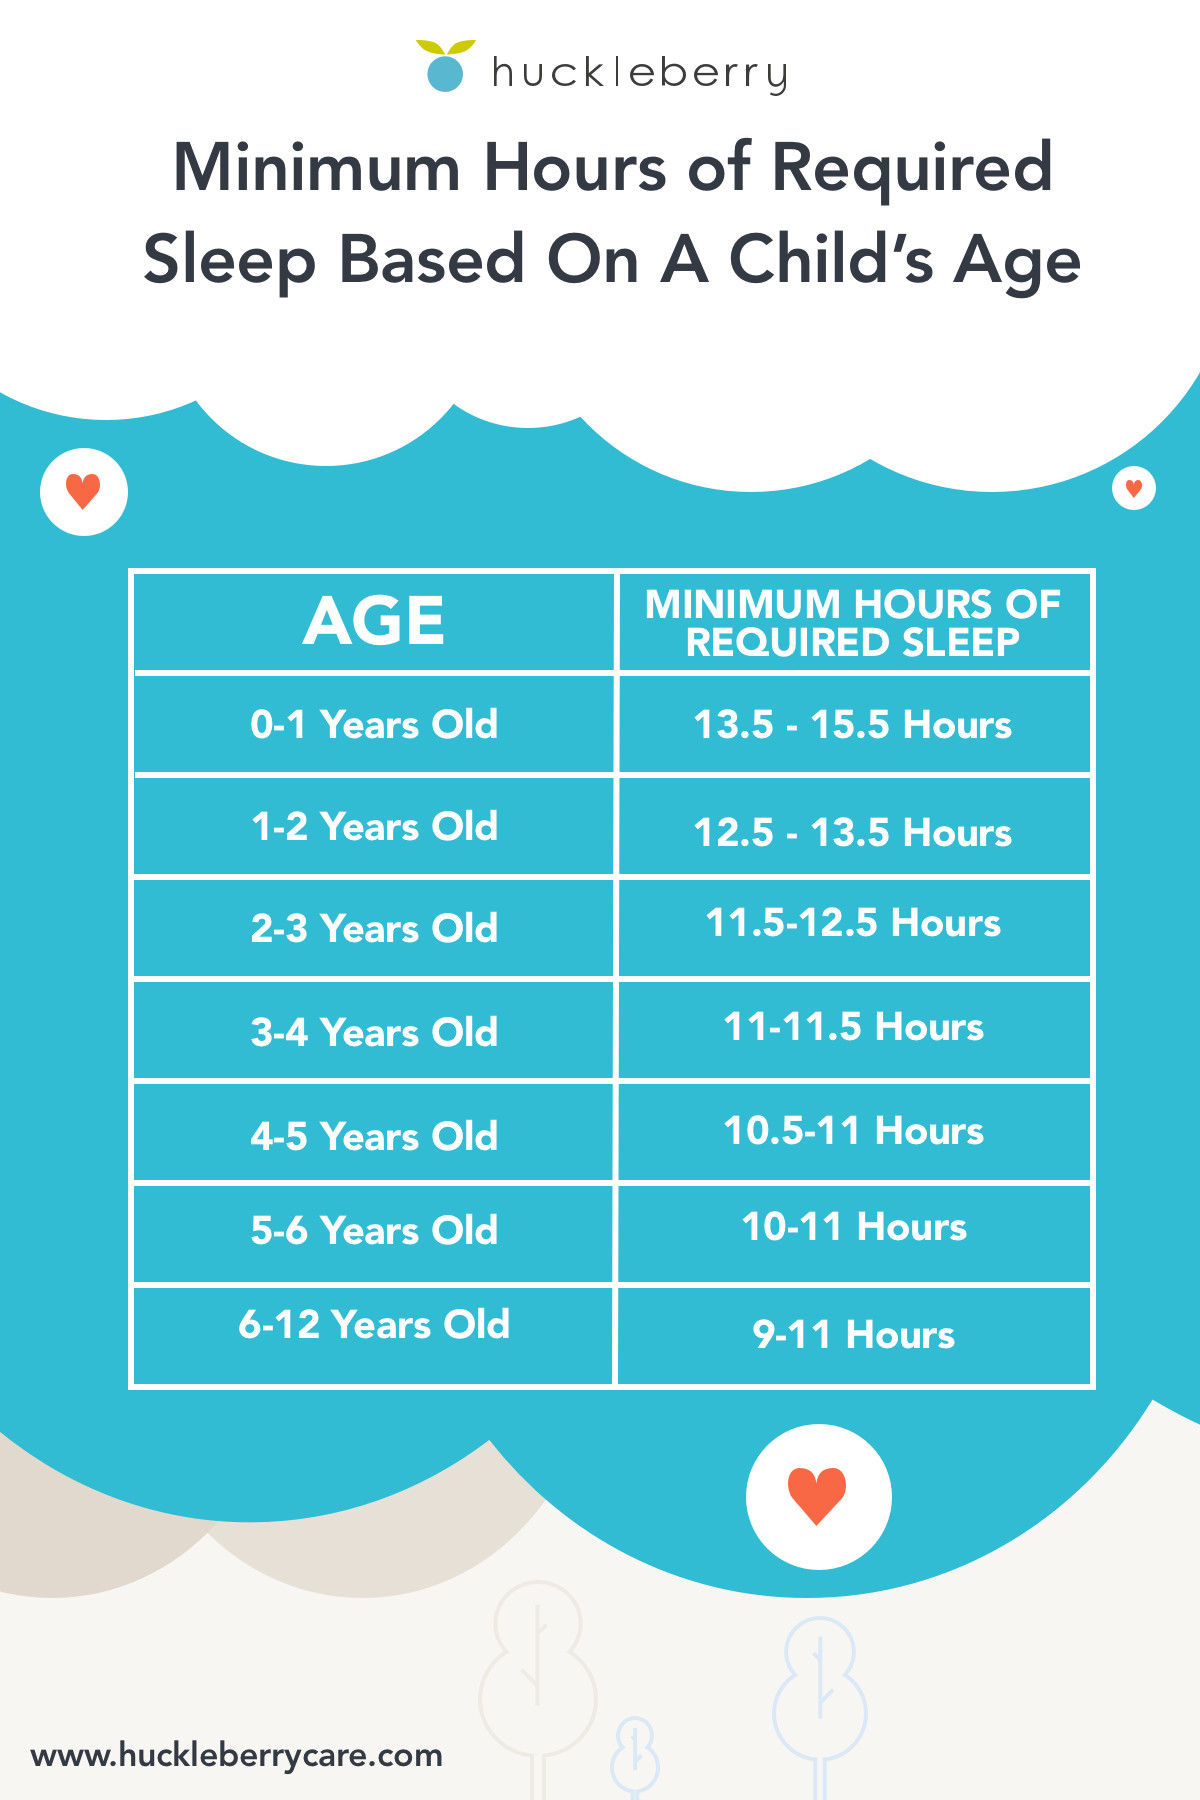 A sleep chart that showcases the minimum hours of required sleep for children between the ages of newborn to 12 years old created by Huckleberry.